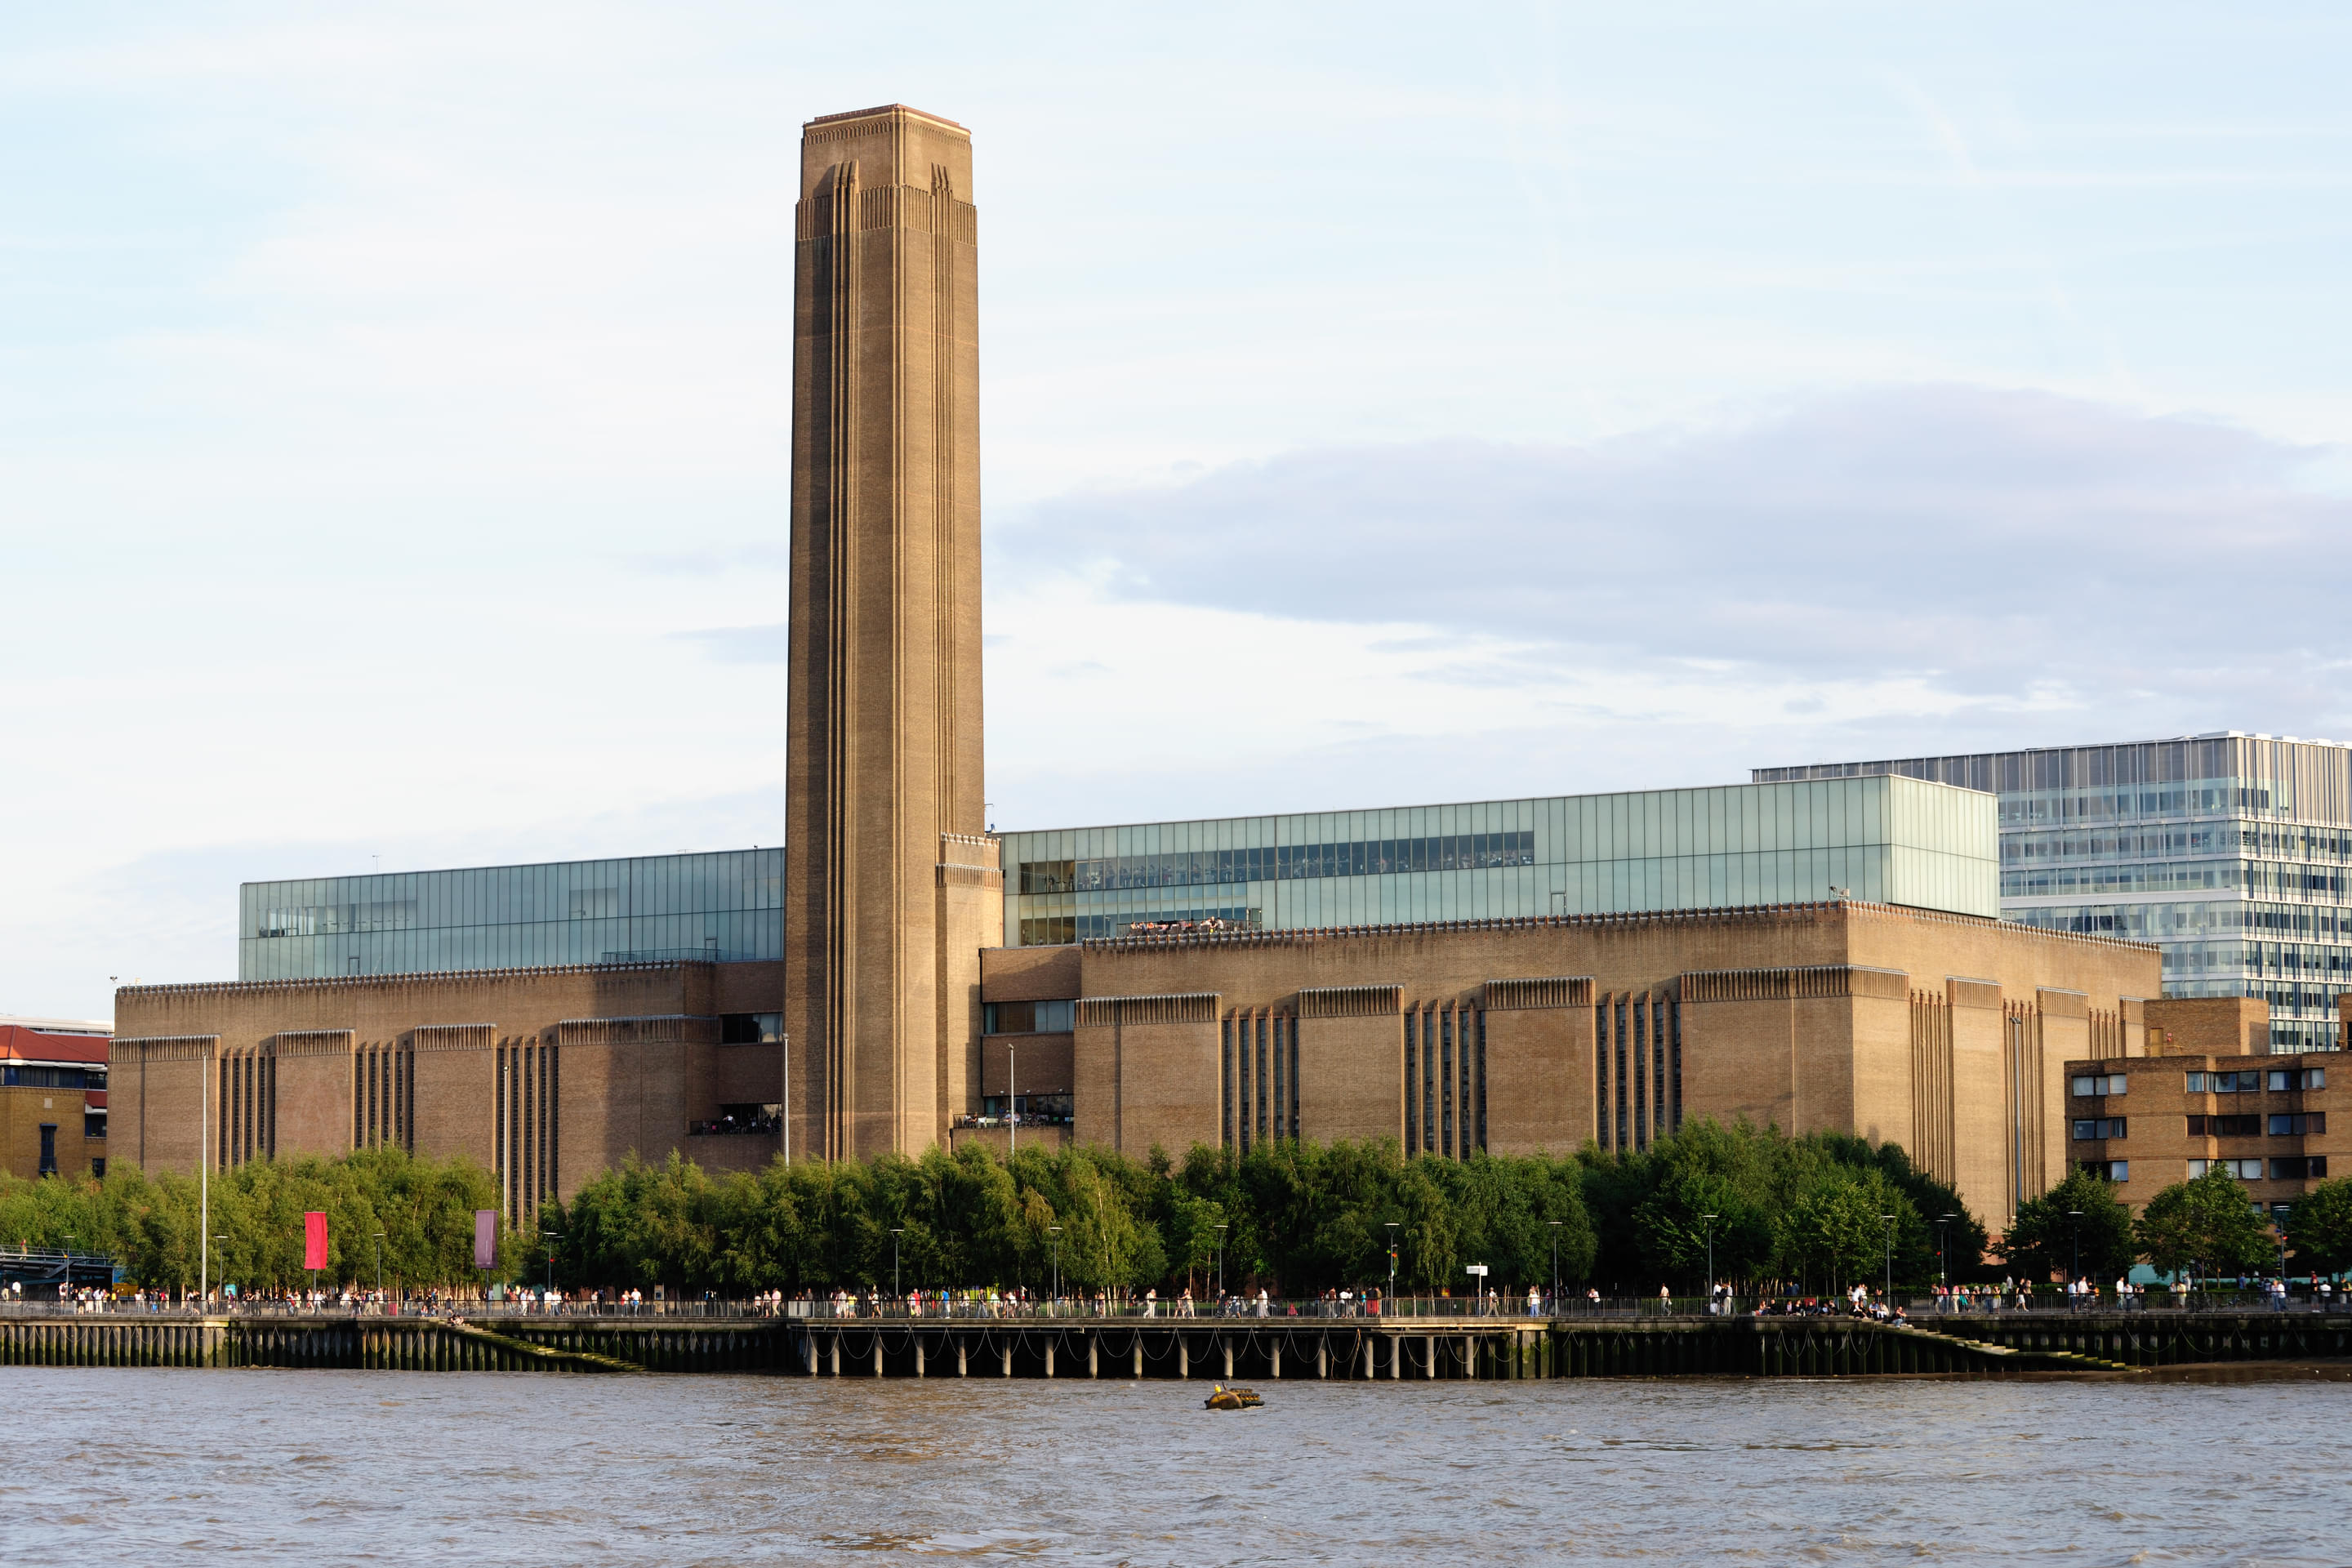 Tate Modern Overview